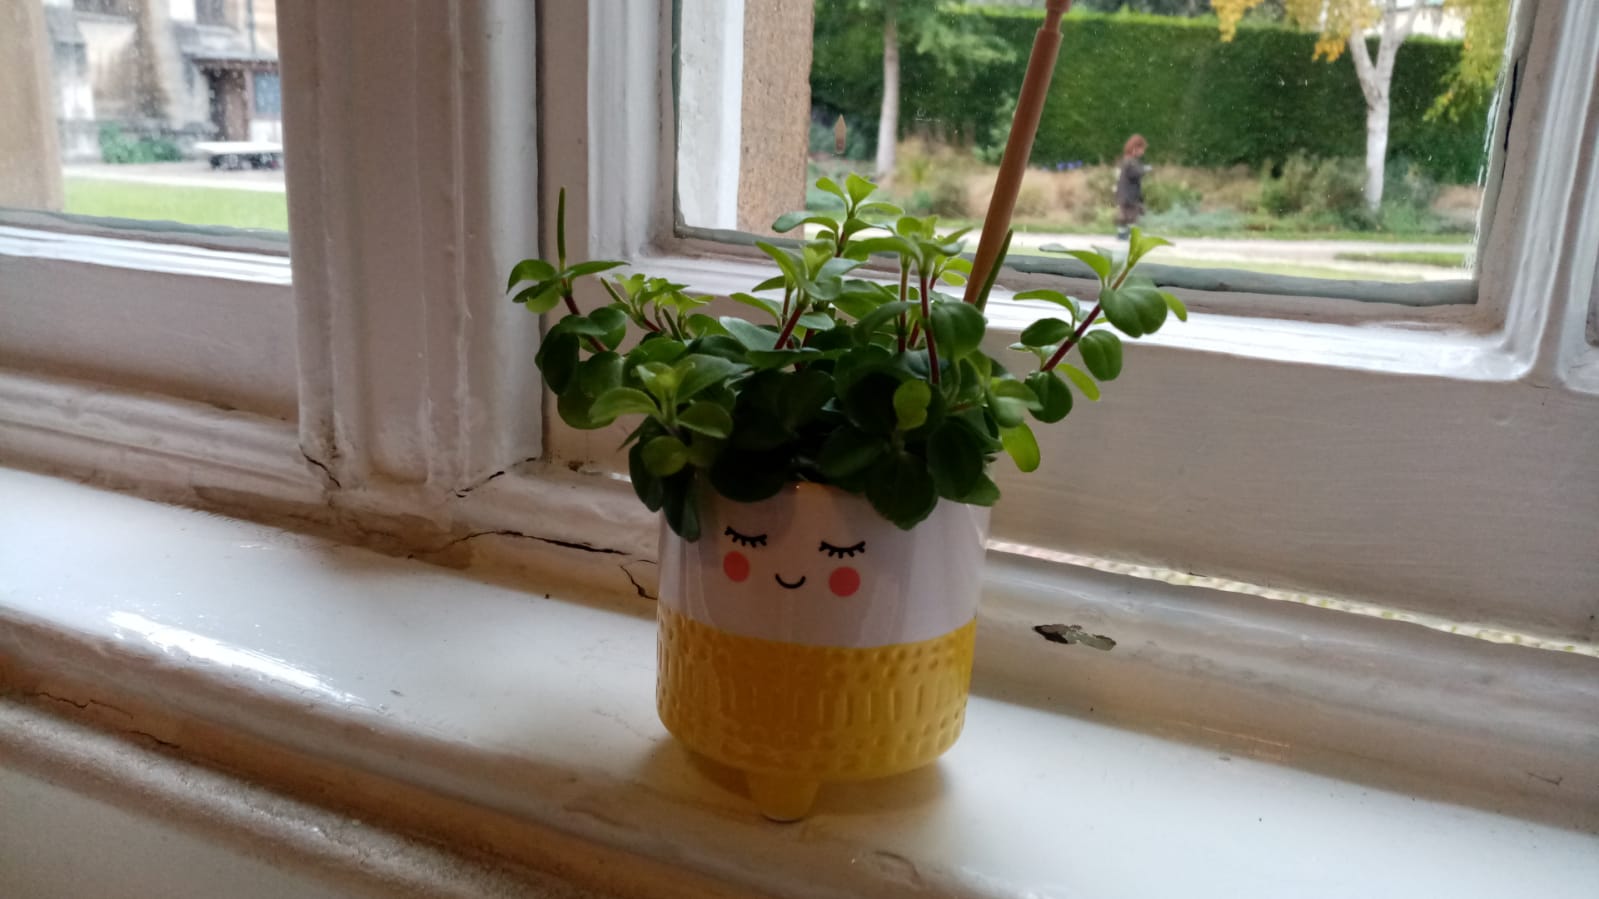 A pot plant with a view behind